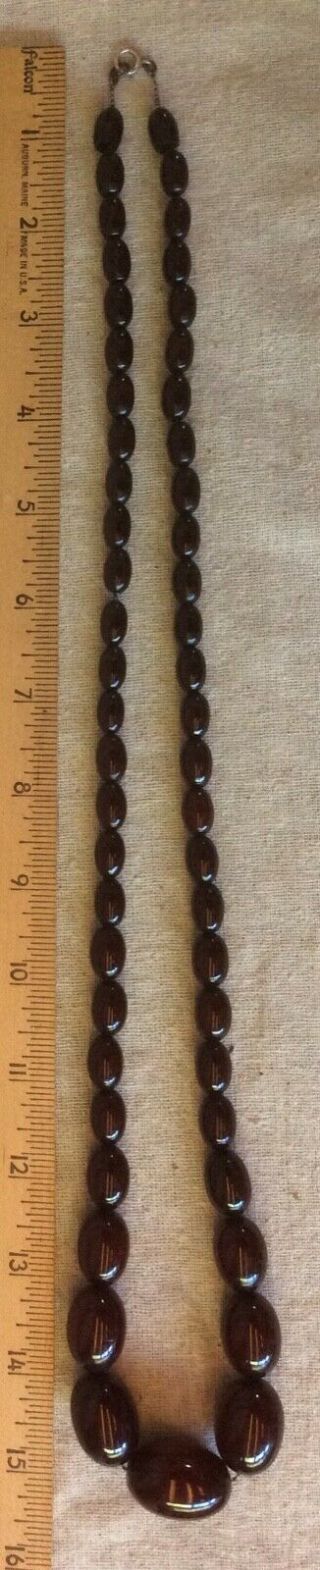 VINTAGE BAKELITE NECKLACE CHERRY AMBER RED OBLONG BEADS threaded on CHAIN 4